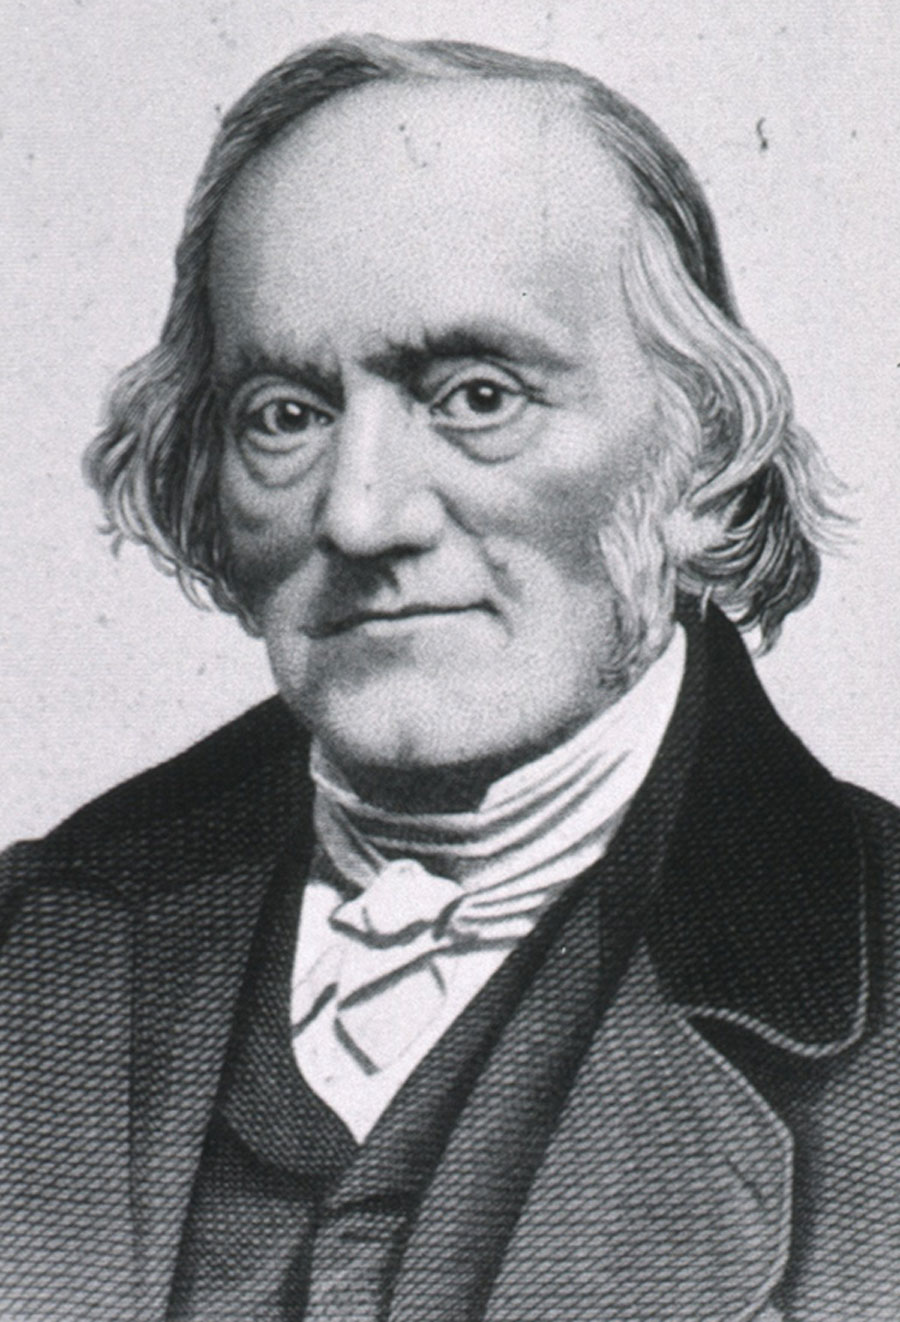 Sir Richard Owen (July 20, 1804–December 18, 1892), English biologist, comparative anatomist, and paleontologist who did not share the credit of discovery of Trichina spiralis with Paget. Source: https://resource.nlm.nih.gov/101424684.